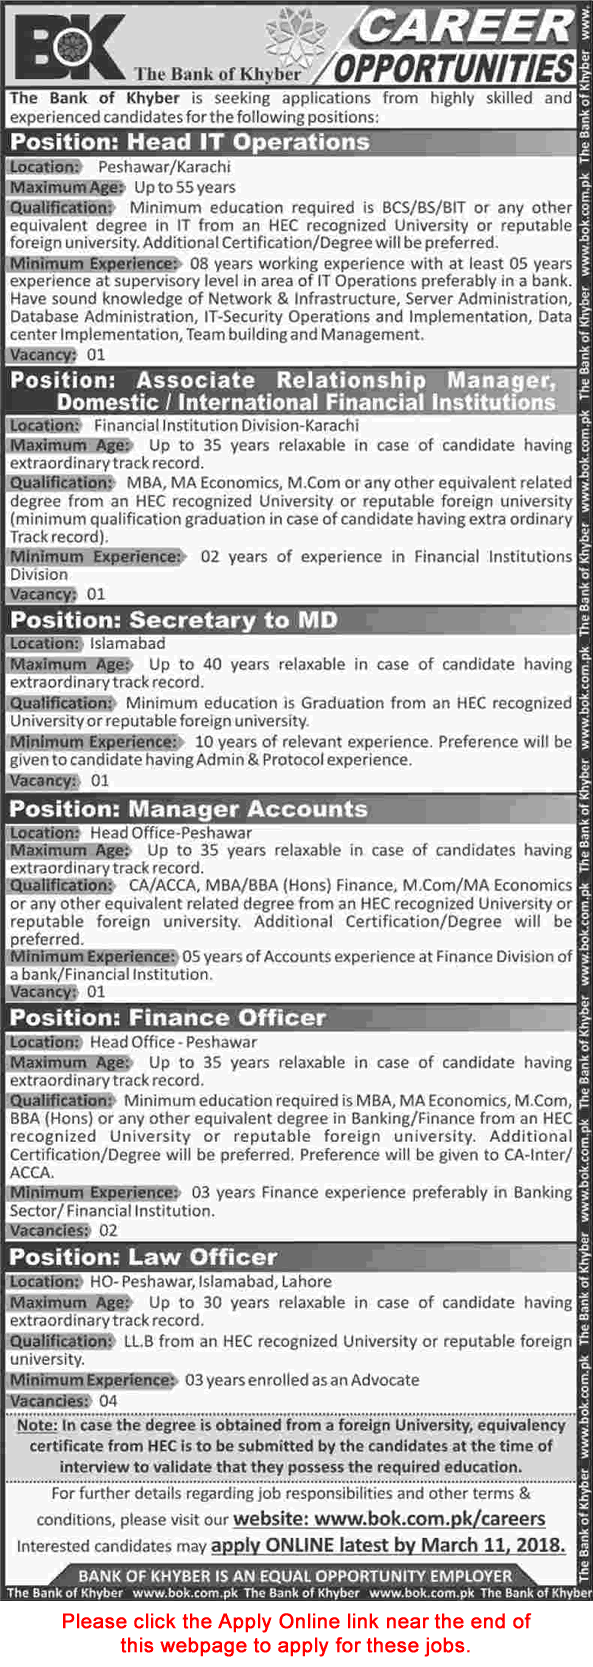 Bank of Khyber Jobs February 2018 Apply Online Law / Finance Officers & Others BOK Latest